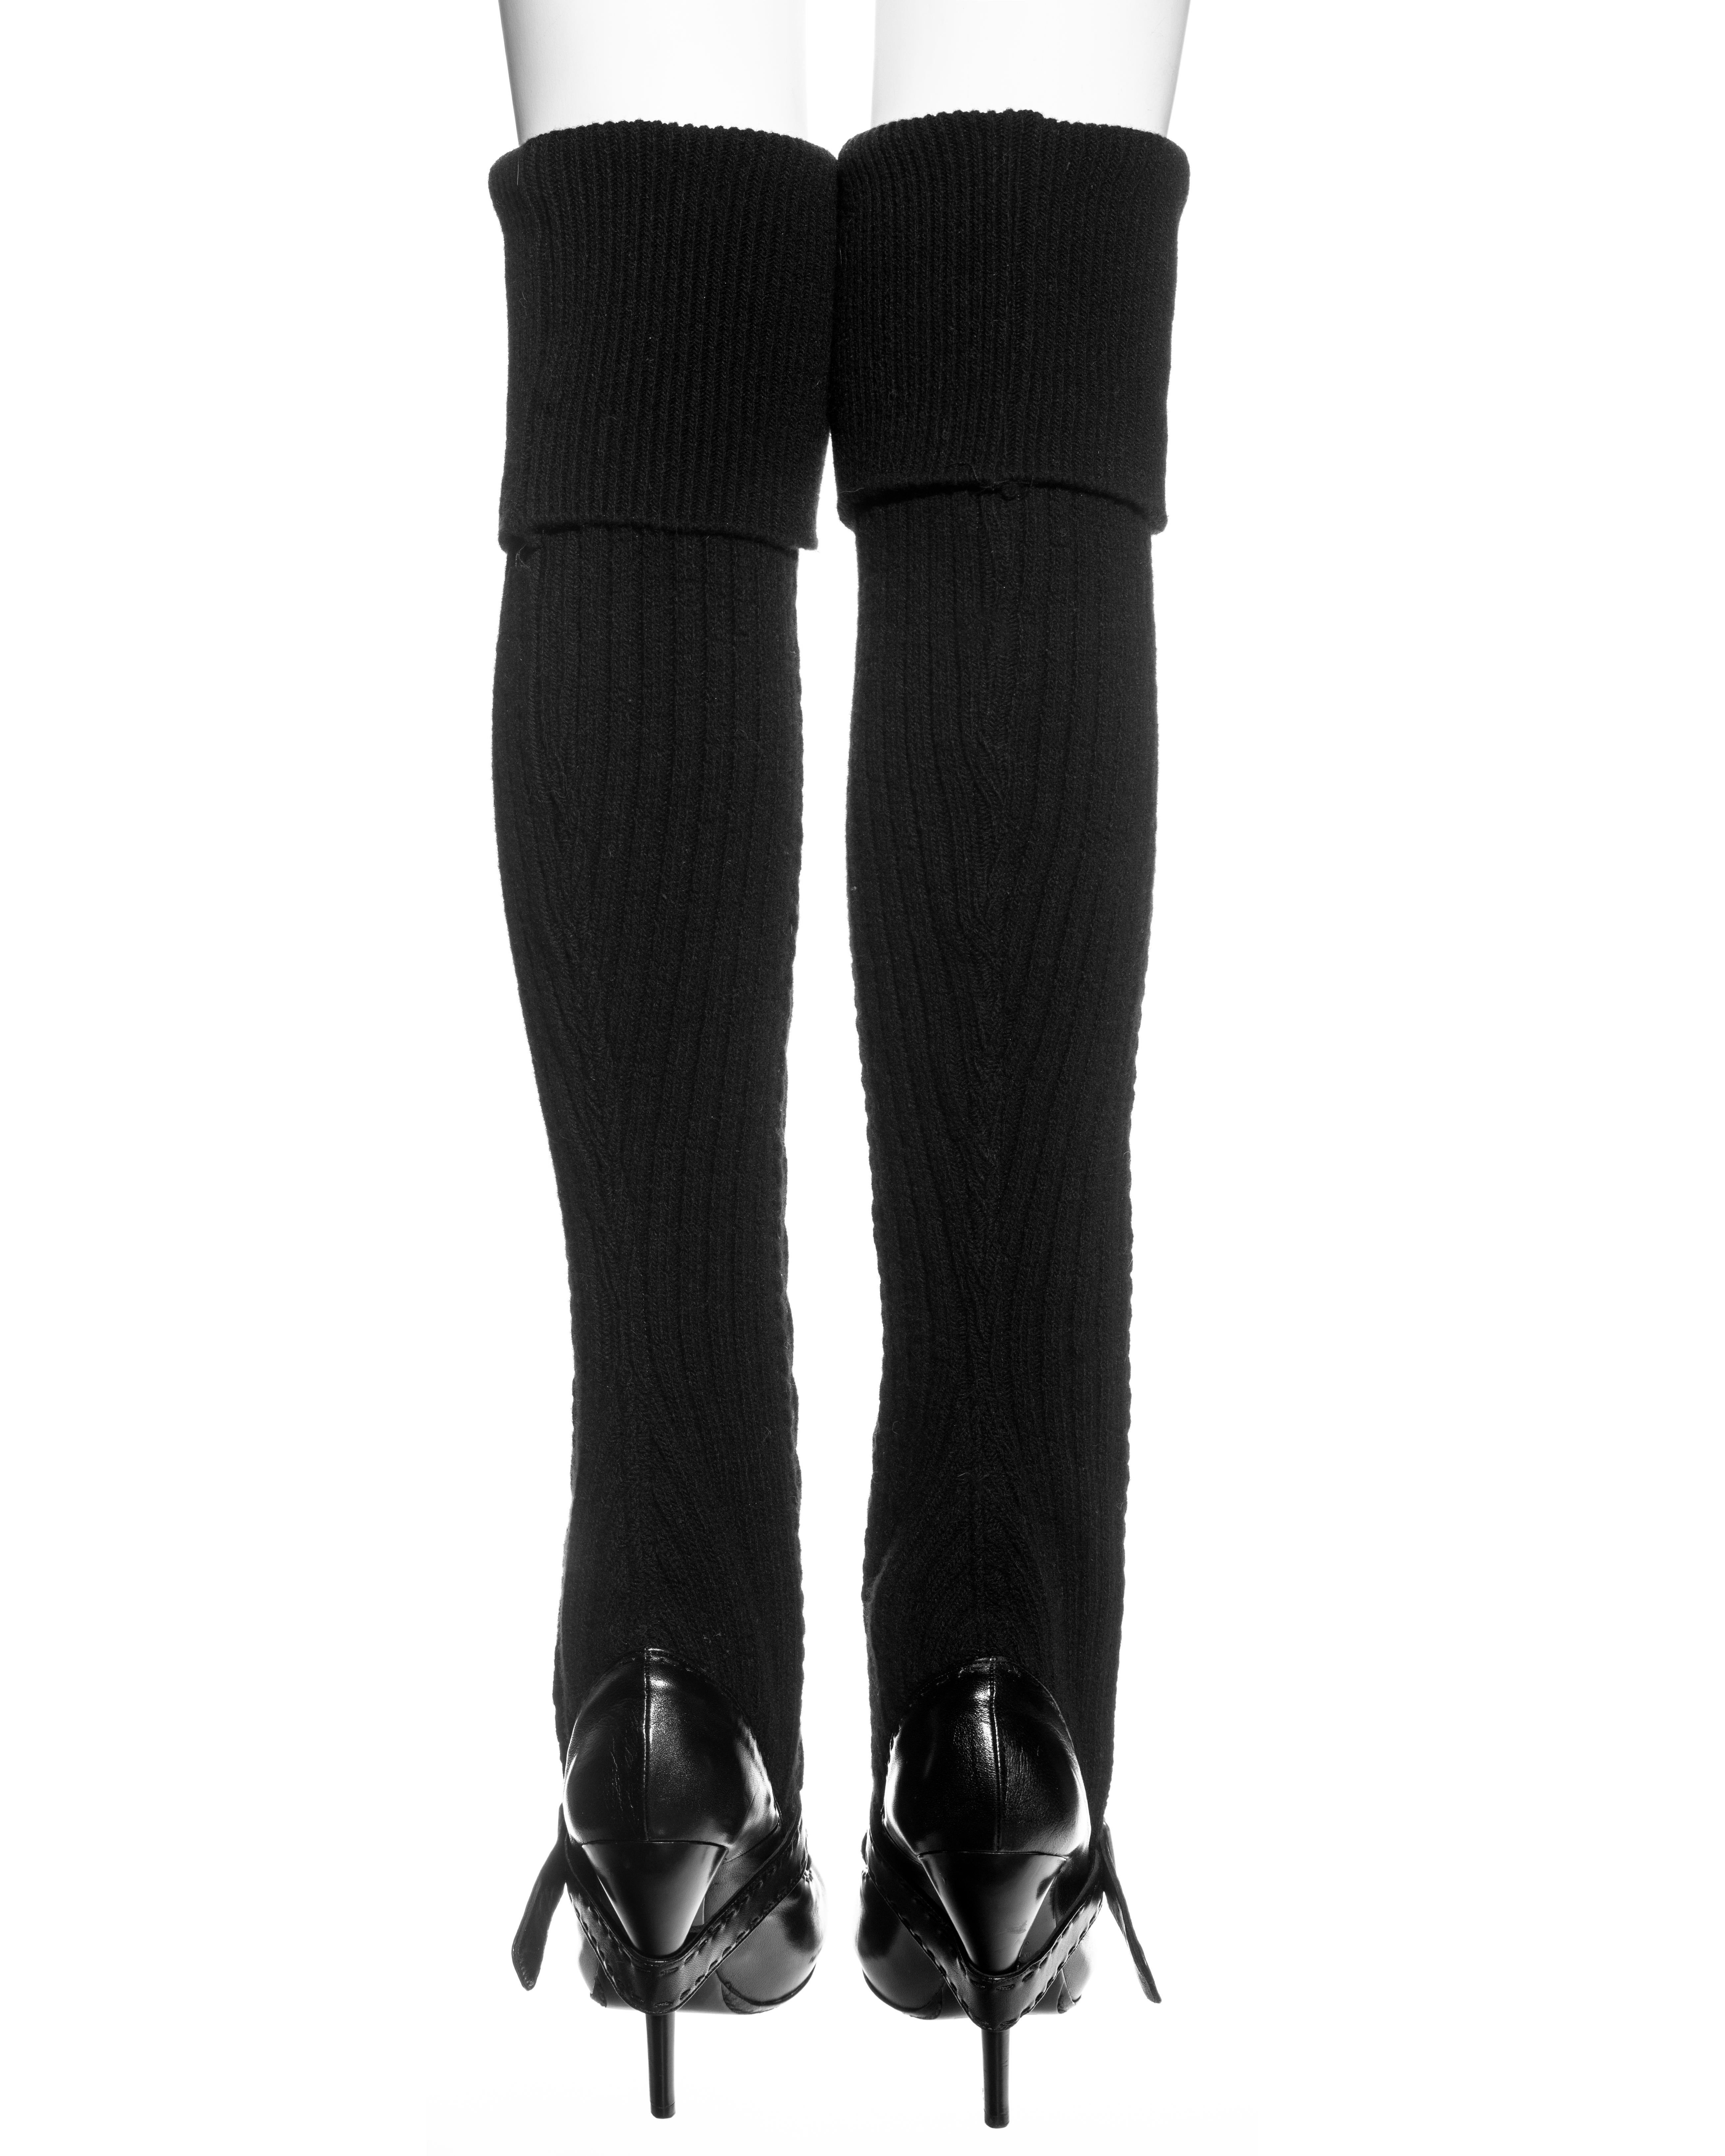 Women's Alexander McQueen black leather thigh-high sock boots, fw 2006 For Sale